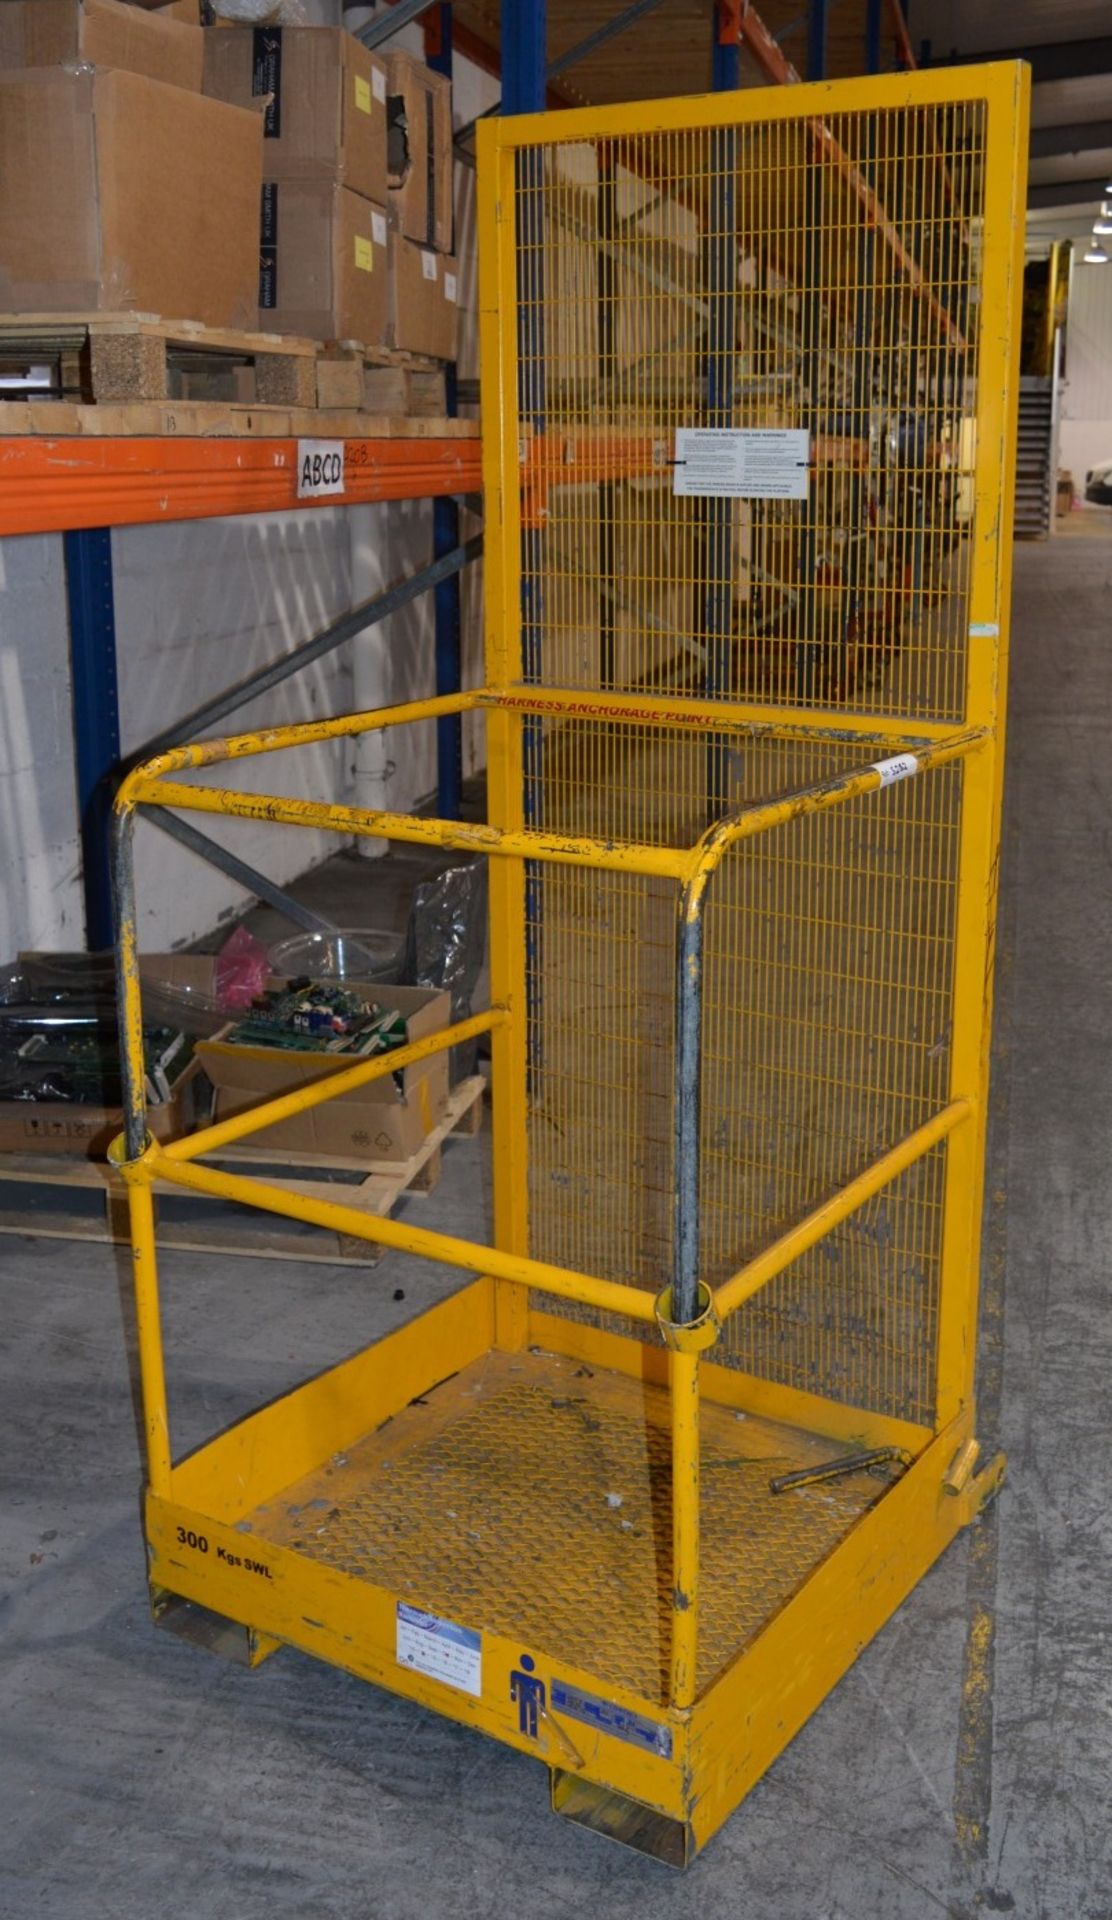 1 x One Man Access Platform Forklift Truck Cage - Type WP SP MK1 - Features Climb Through Bars Rigid - Image 2 of 7